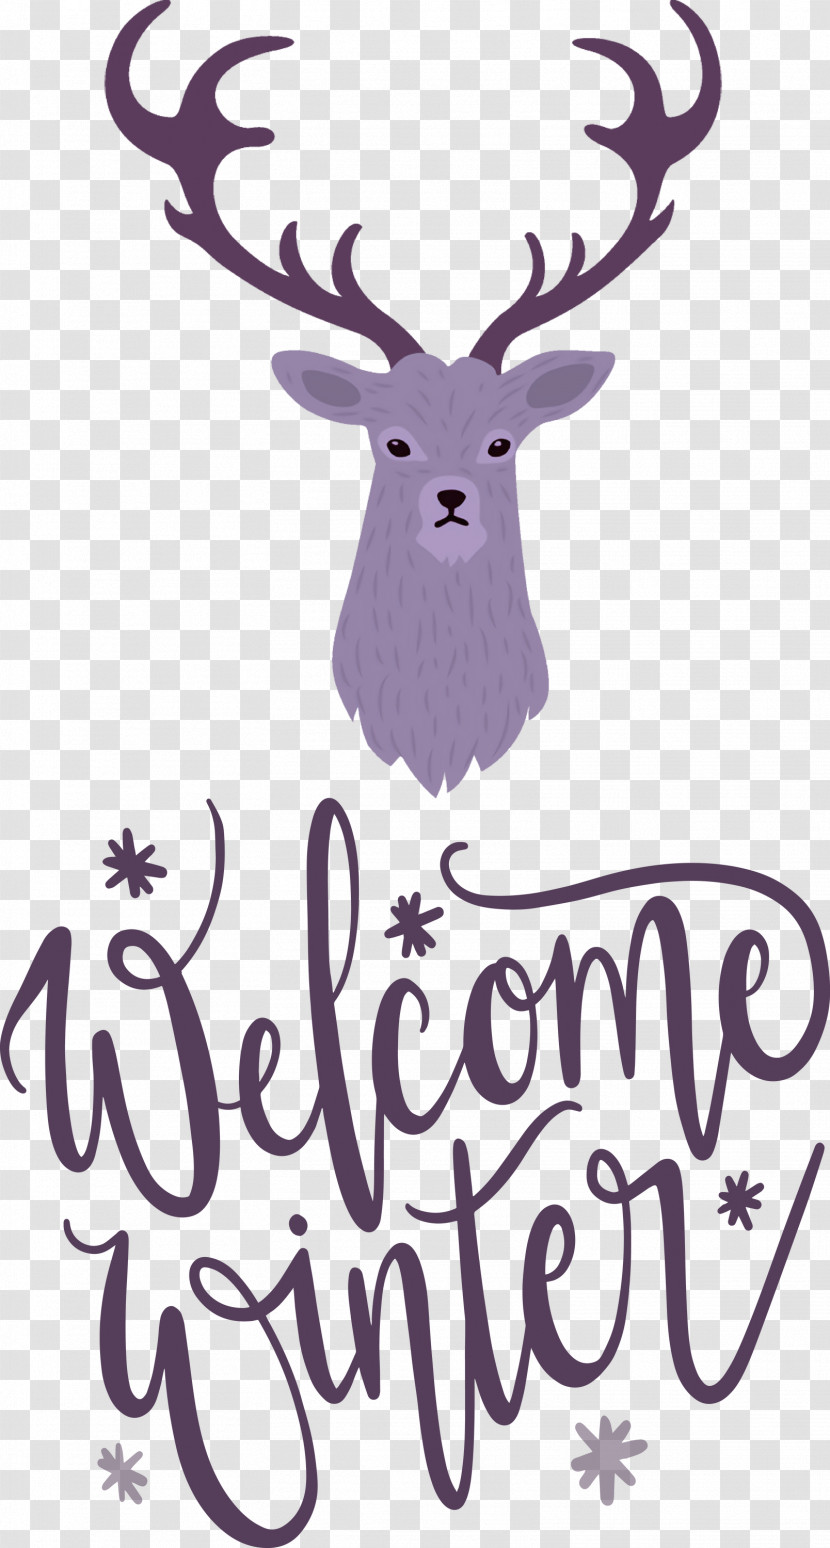 Welcome Winter Transparent PNG